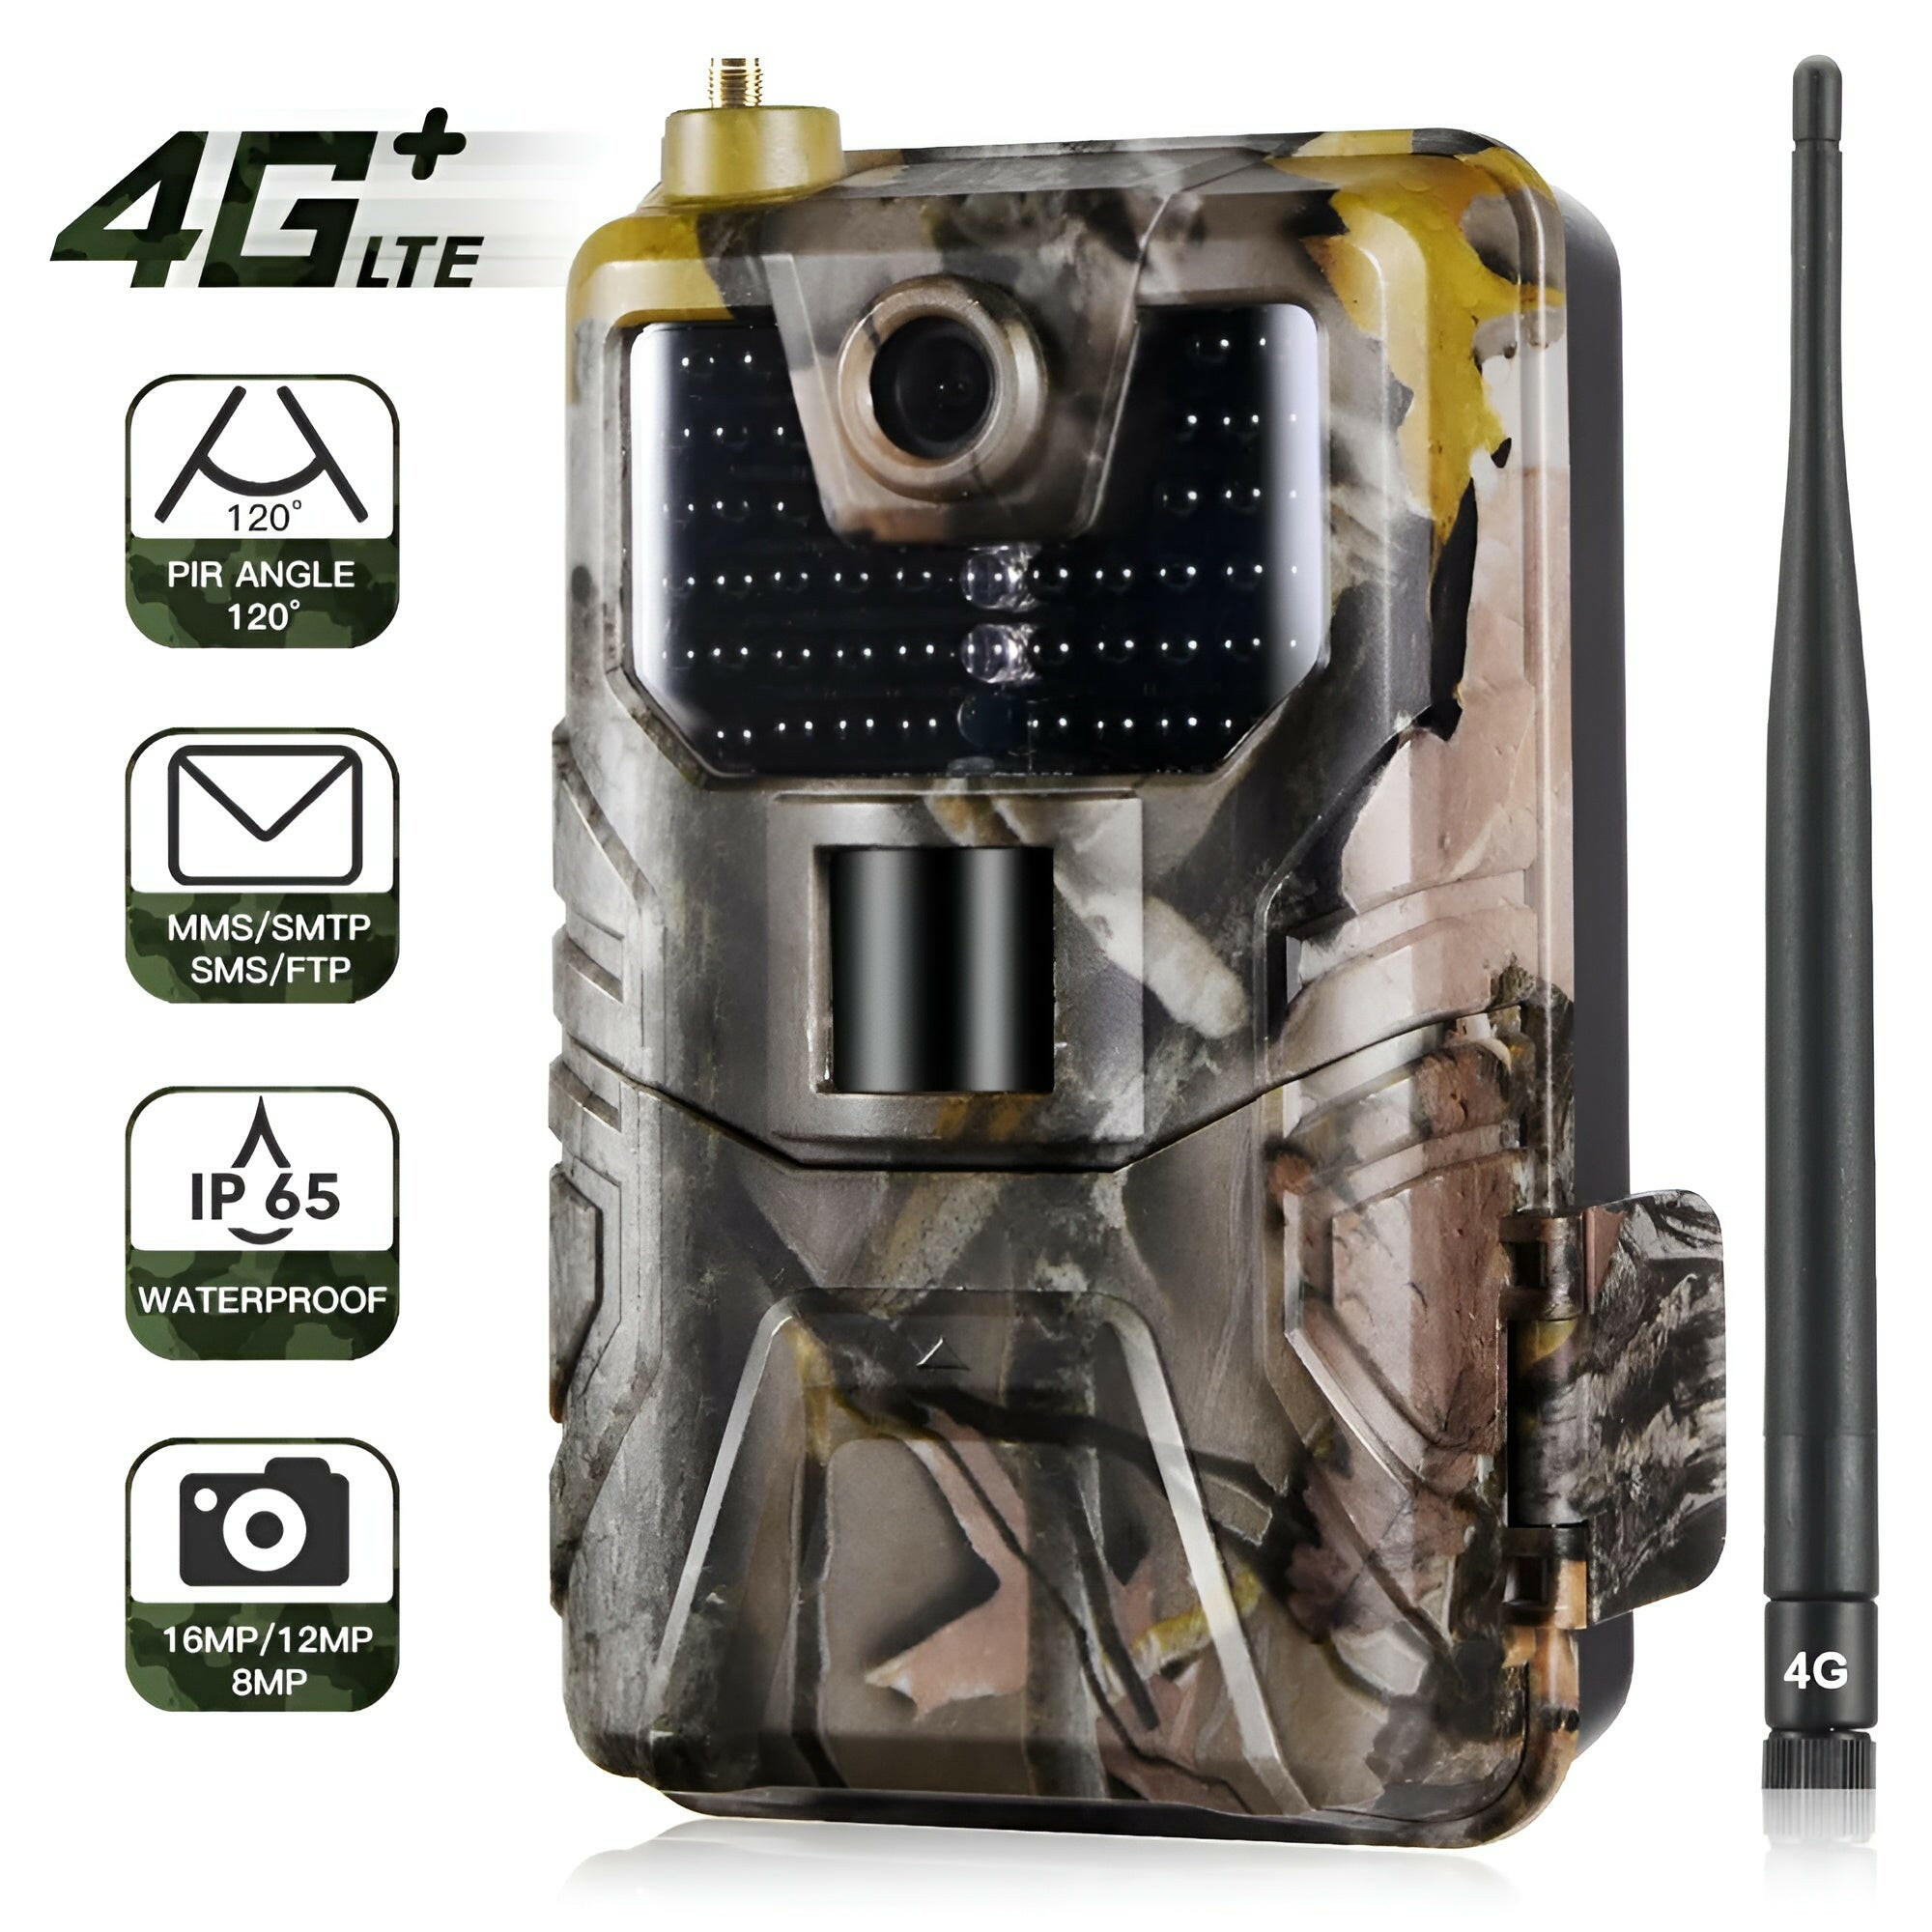 RapidCapture HC900LTE: 20MP 4G Hunting Trail Camera From Rancher’s Ridge